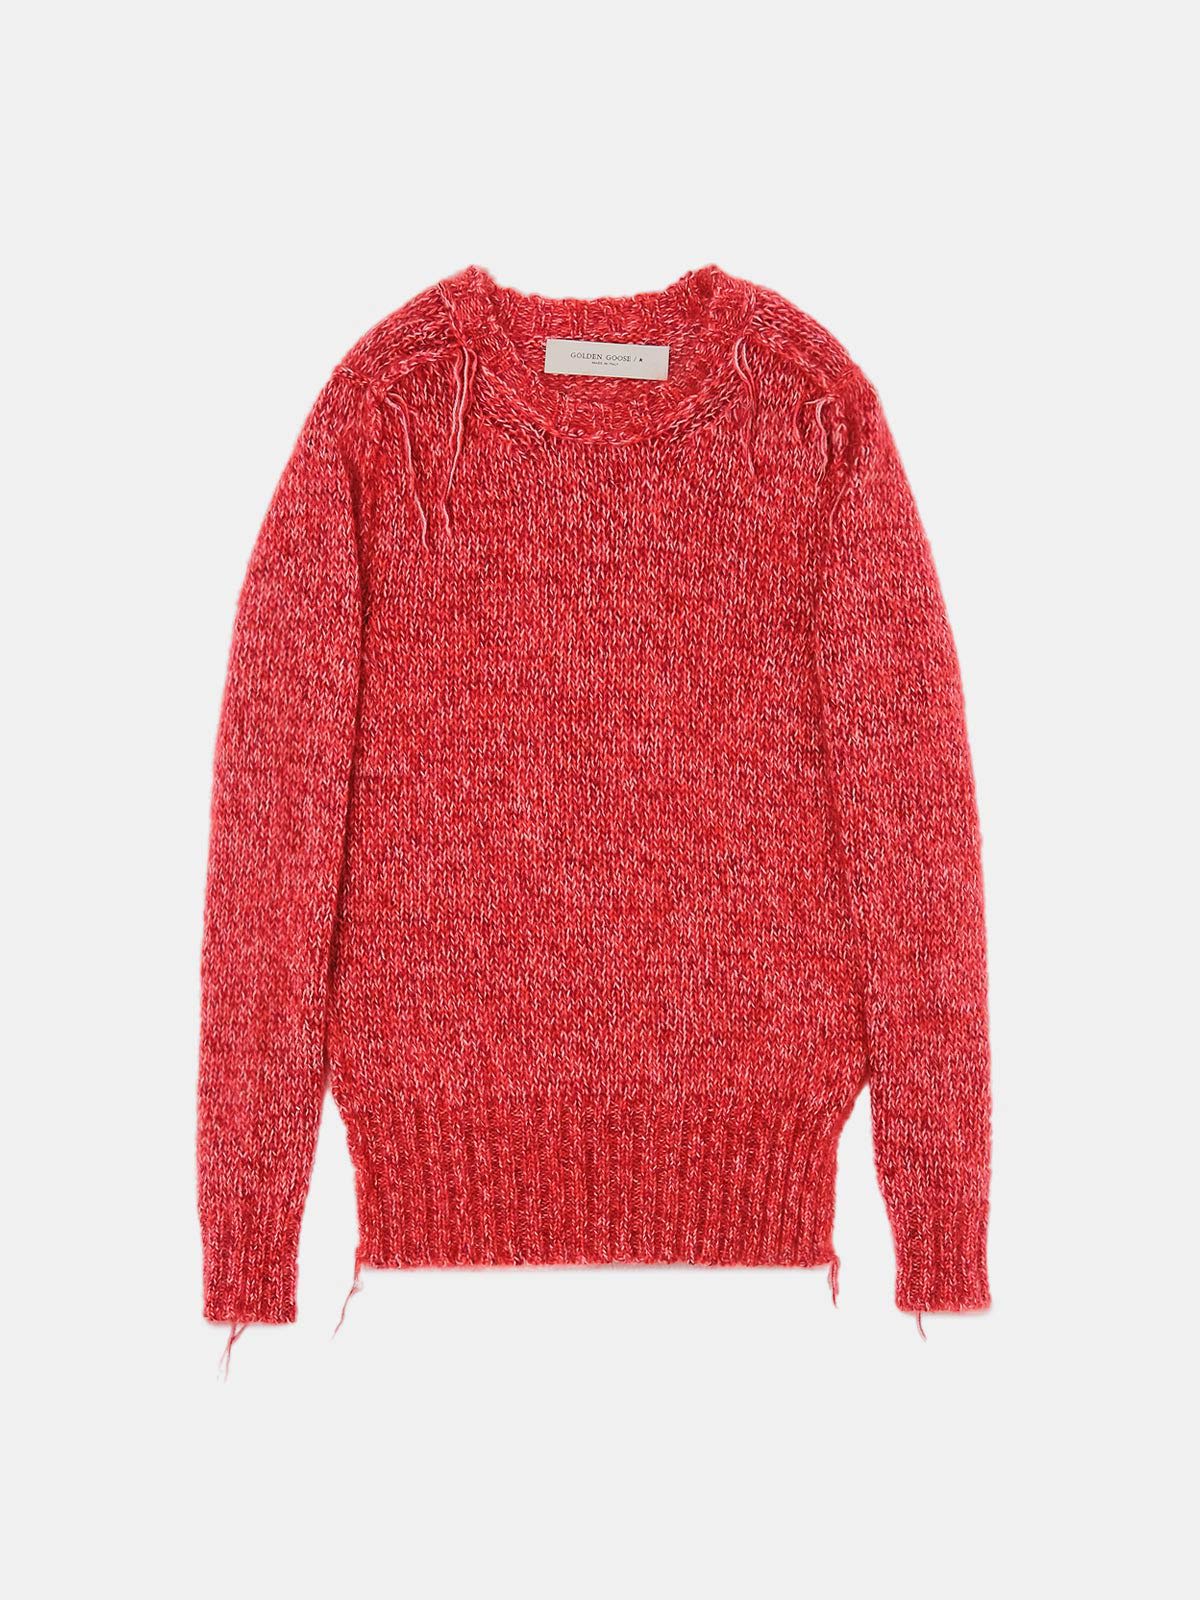 Melange red Annamaria pullover with pin - thegreatputonmvMelange red Annamaria pullover with pinMelange red Annamaria pullover with pinMelange red Annamaria pullover with pinsweaterGolden Goosethegreatputonmv102862Melange red Annamaria pullover with pinS18633401